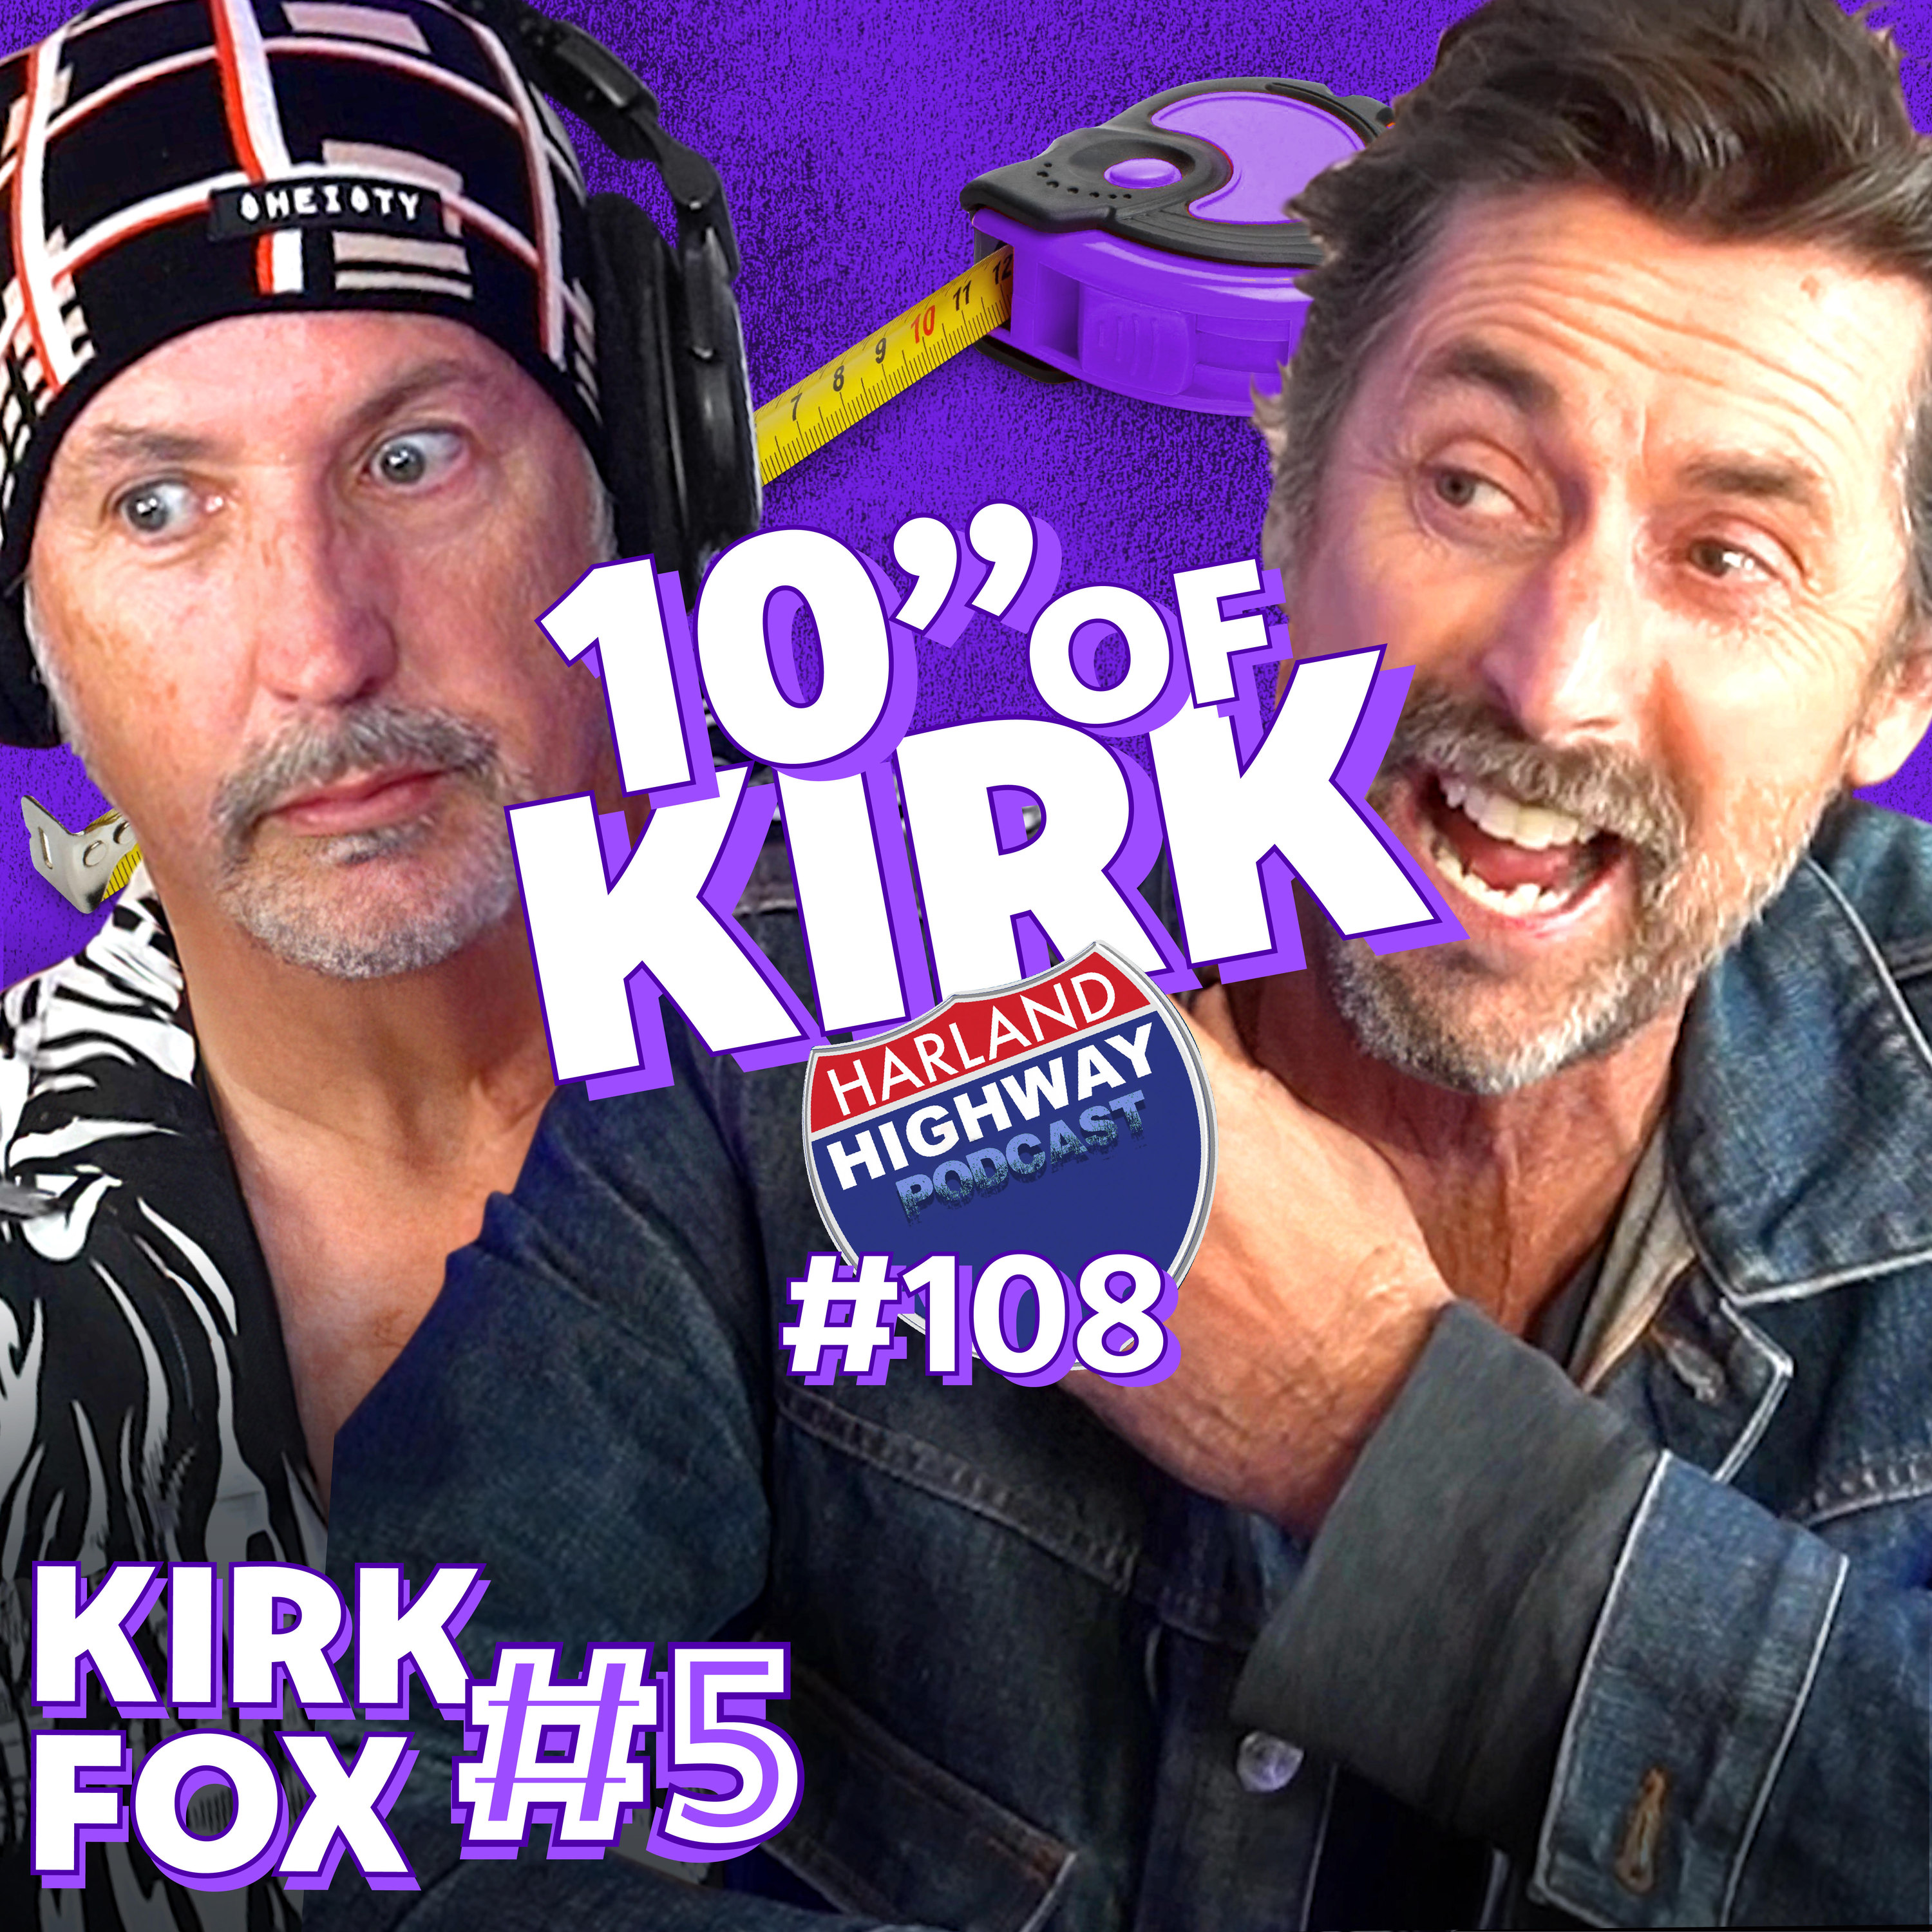 KIRK FOX RETURNS-  with 8 to 10 inches of pure comedy!!